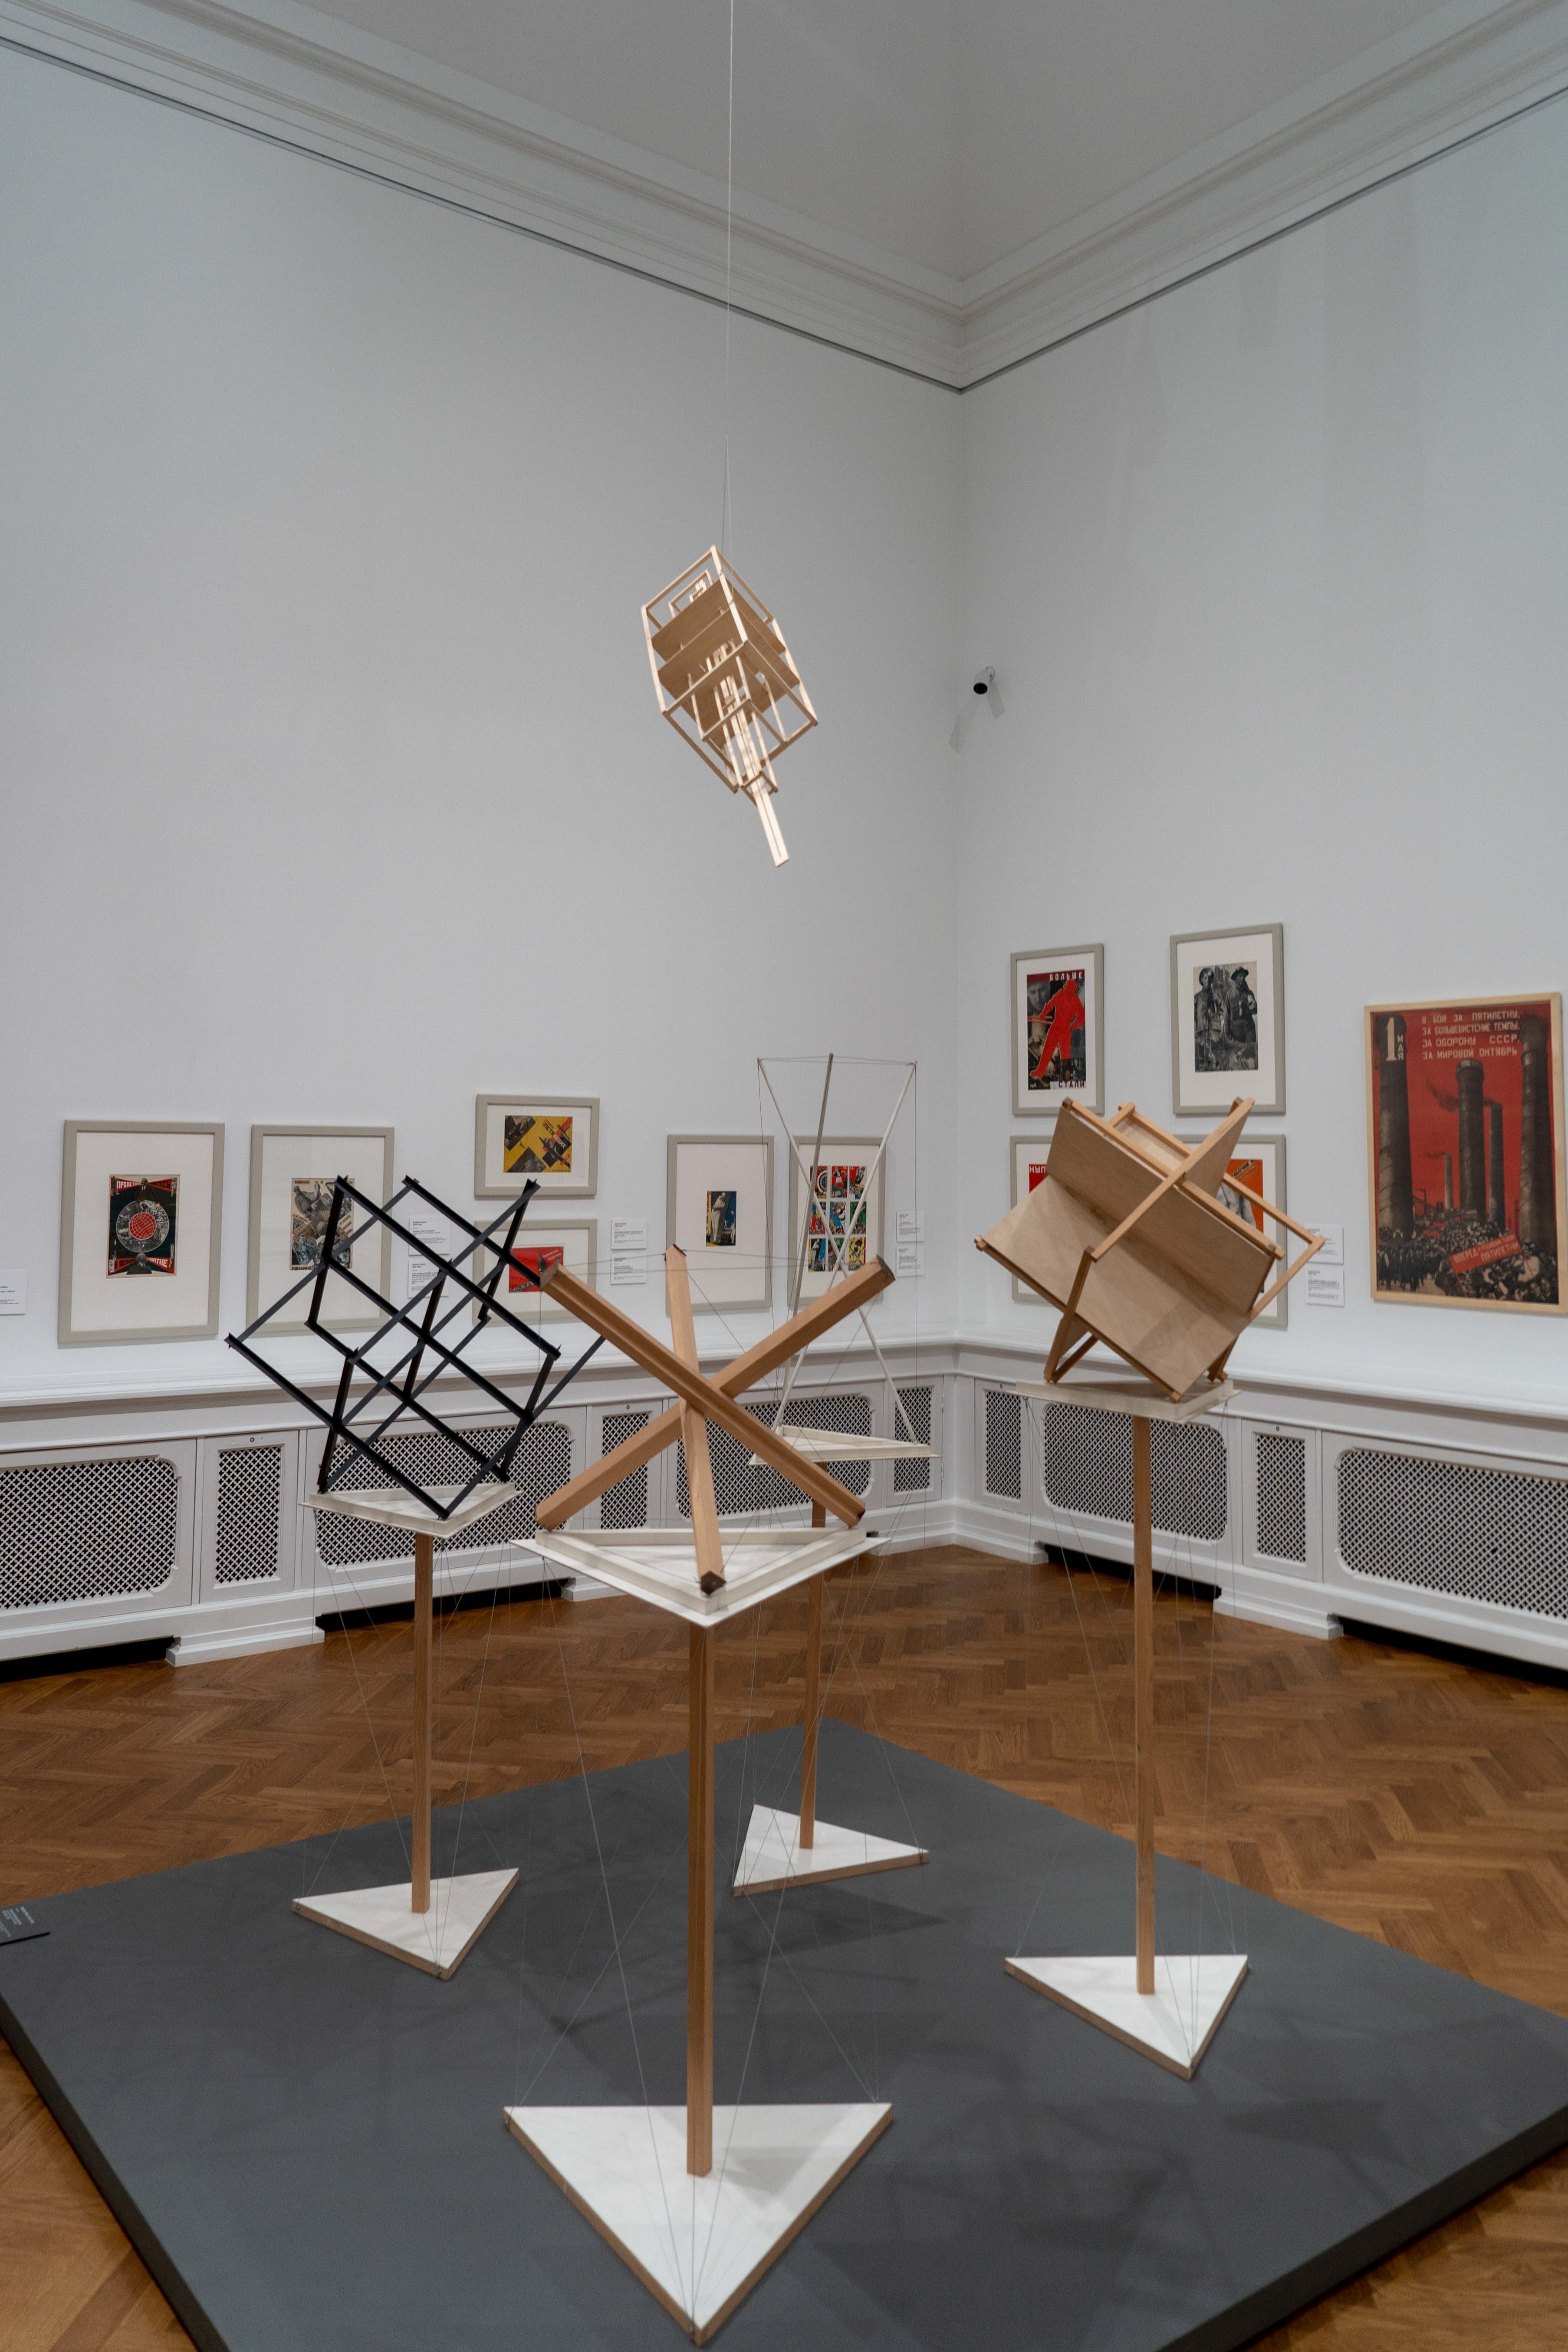 Musee National Arts Lettonie Visiter Riga Odysight Blog Voyage